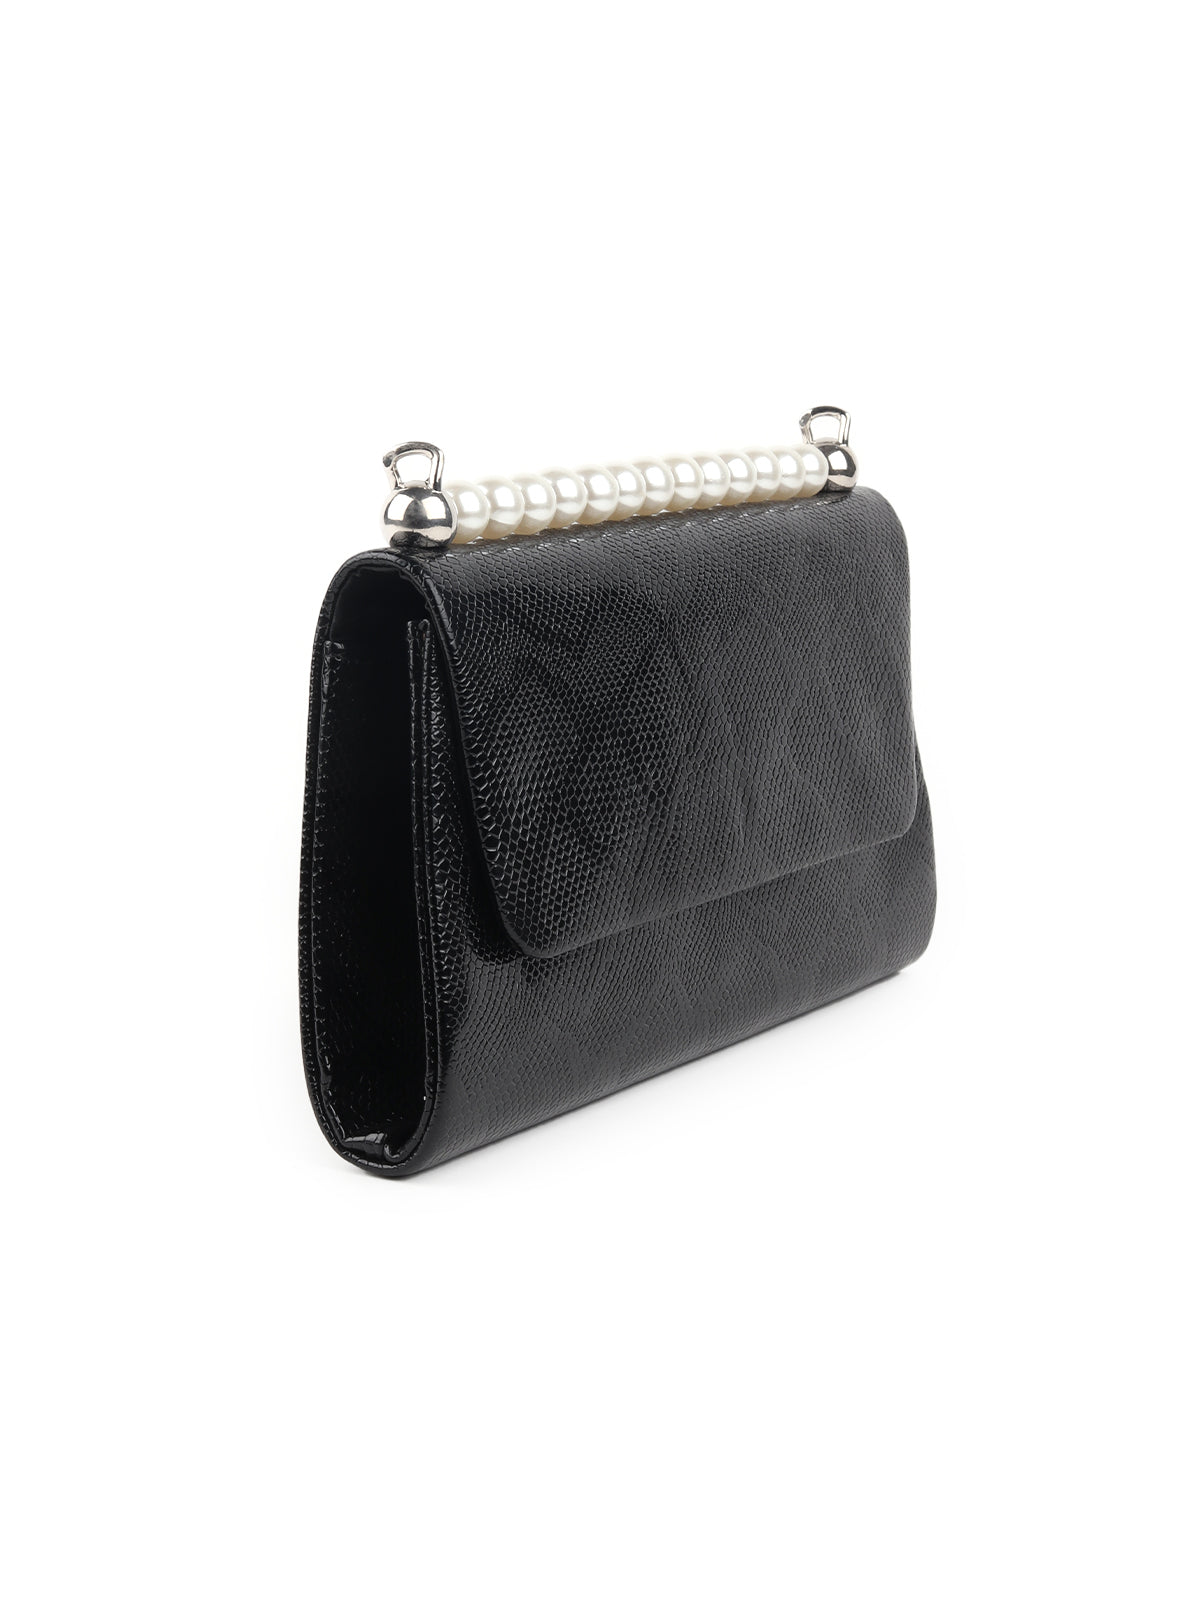 Shop Black Stonework Leather Clutch by RICHA GUPTA at House of Designers –  HOUSE OF DESIGNERS